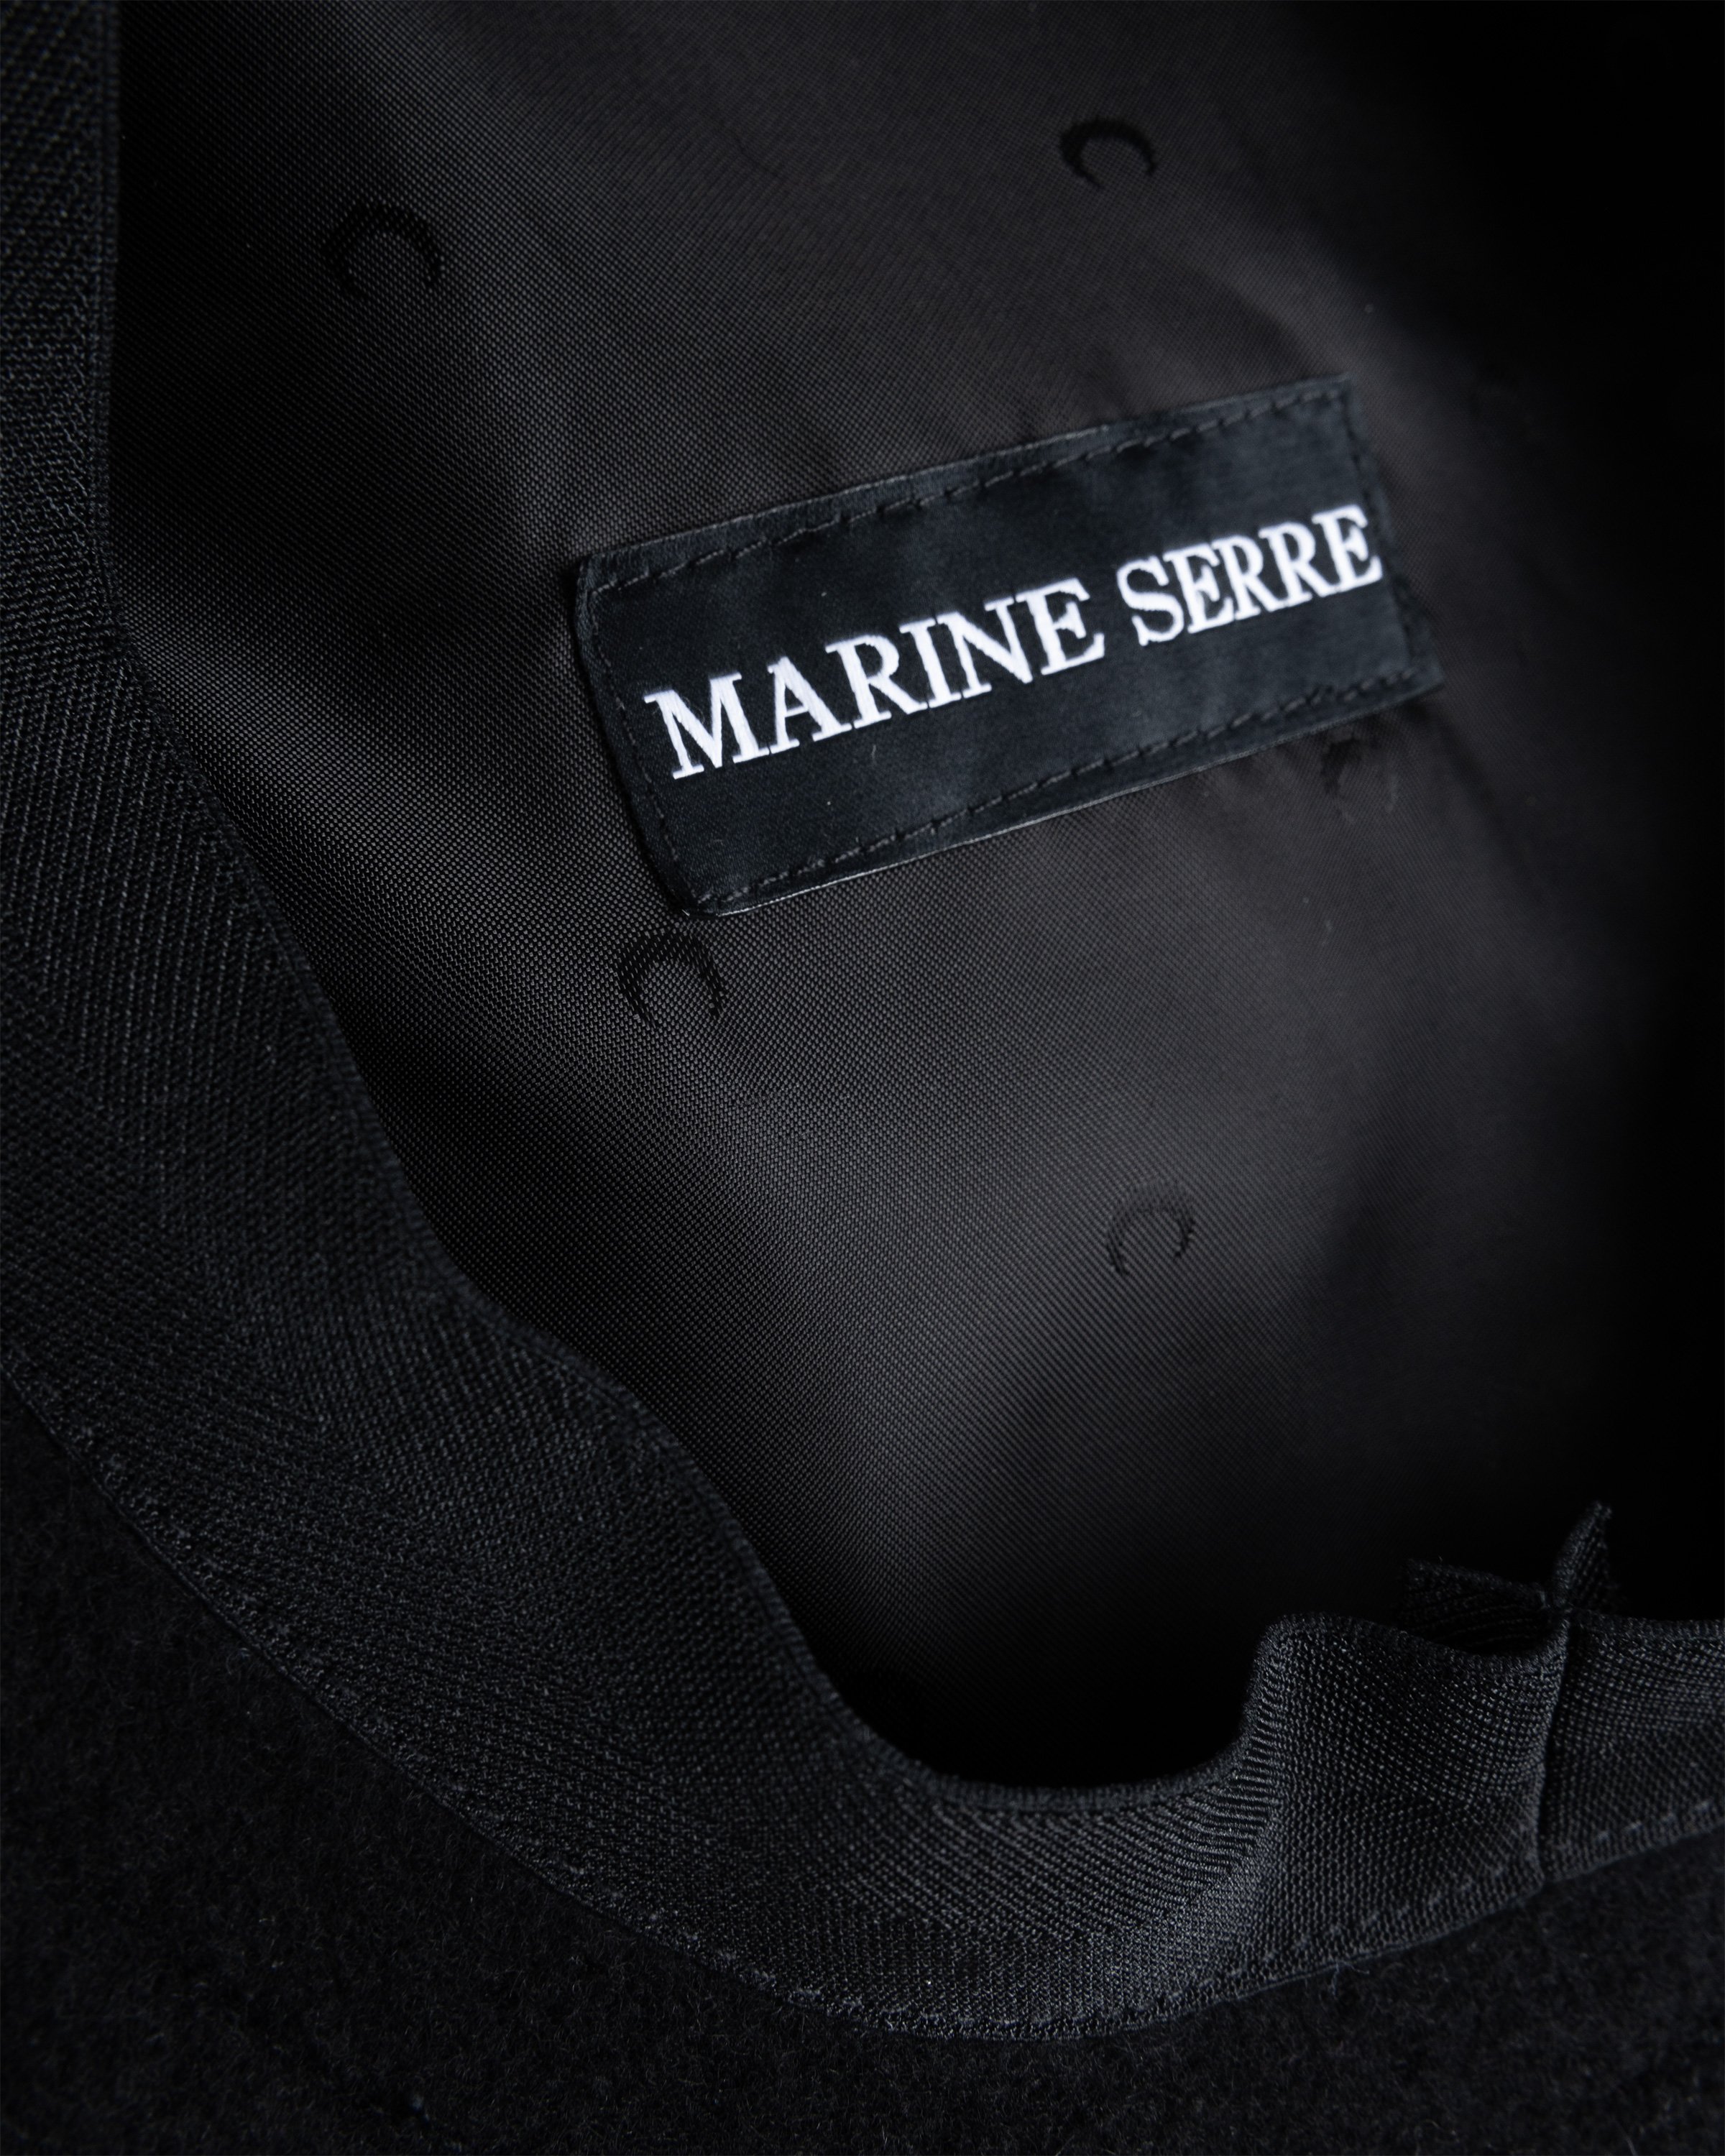 Marine Serre - Embroidered French Beret Black - Accessories - Black - Image 4